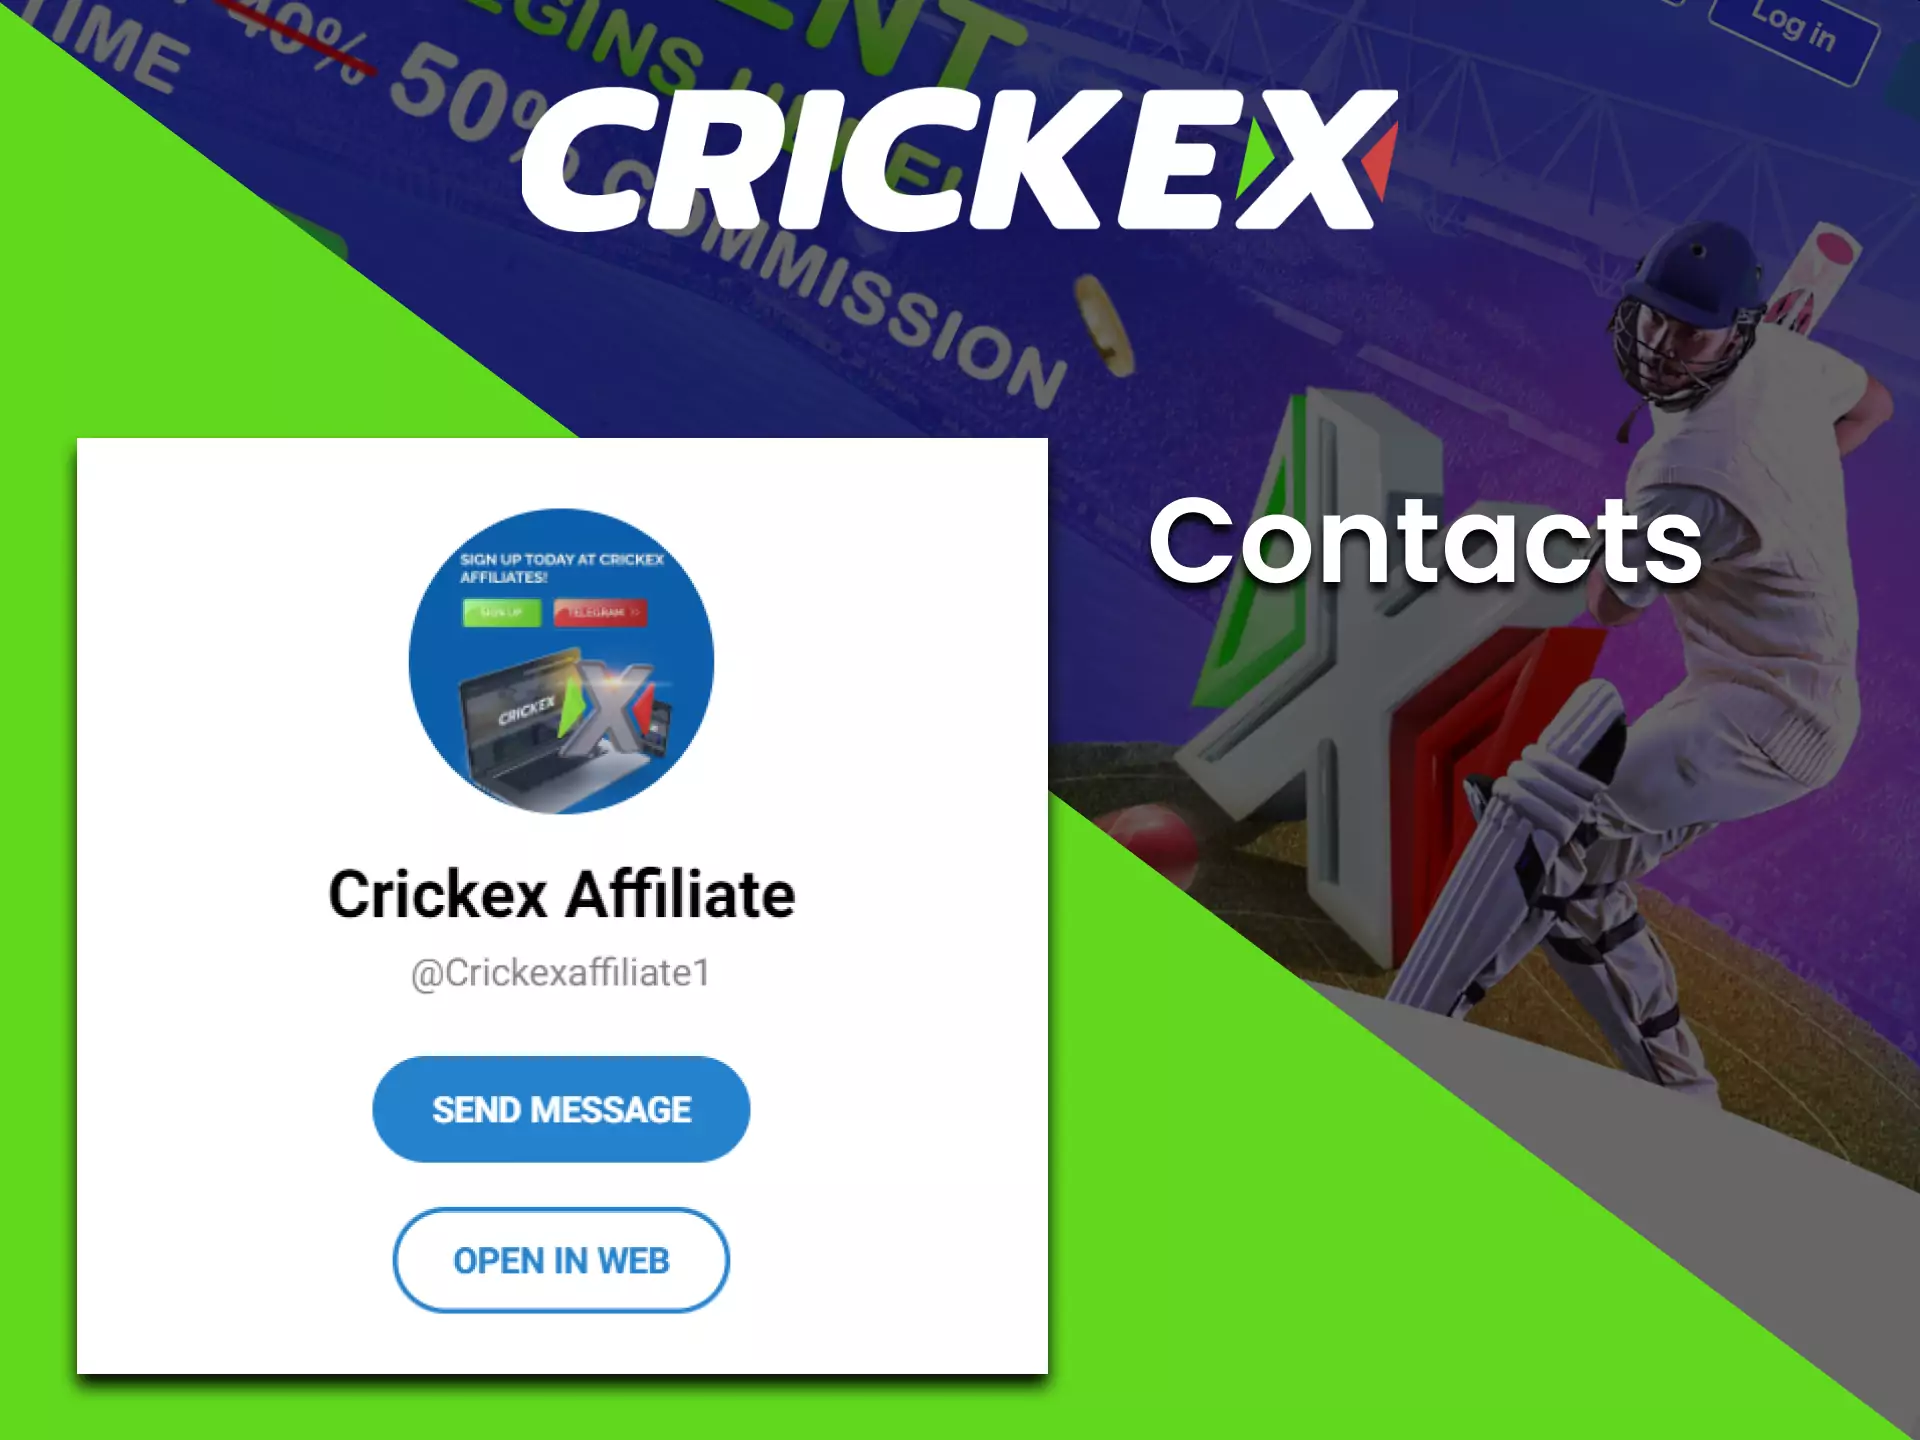 Contact the Crickex support team if you have questions.